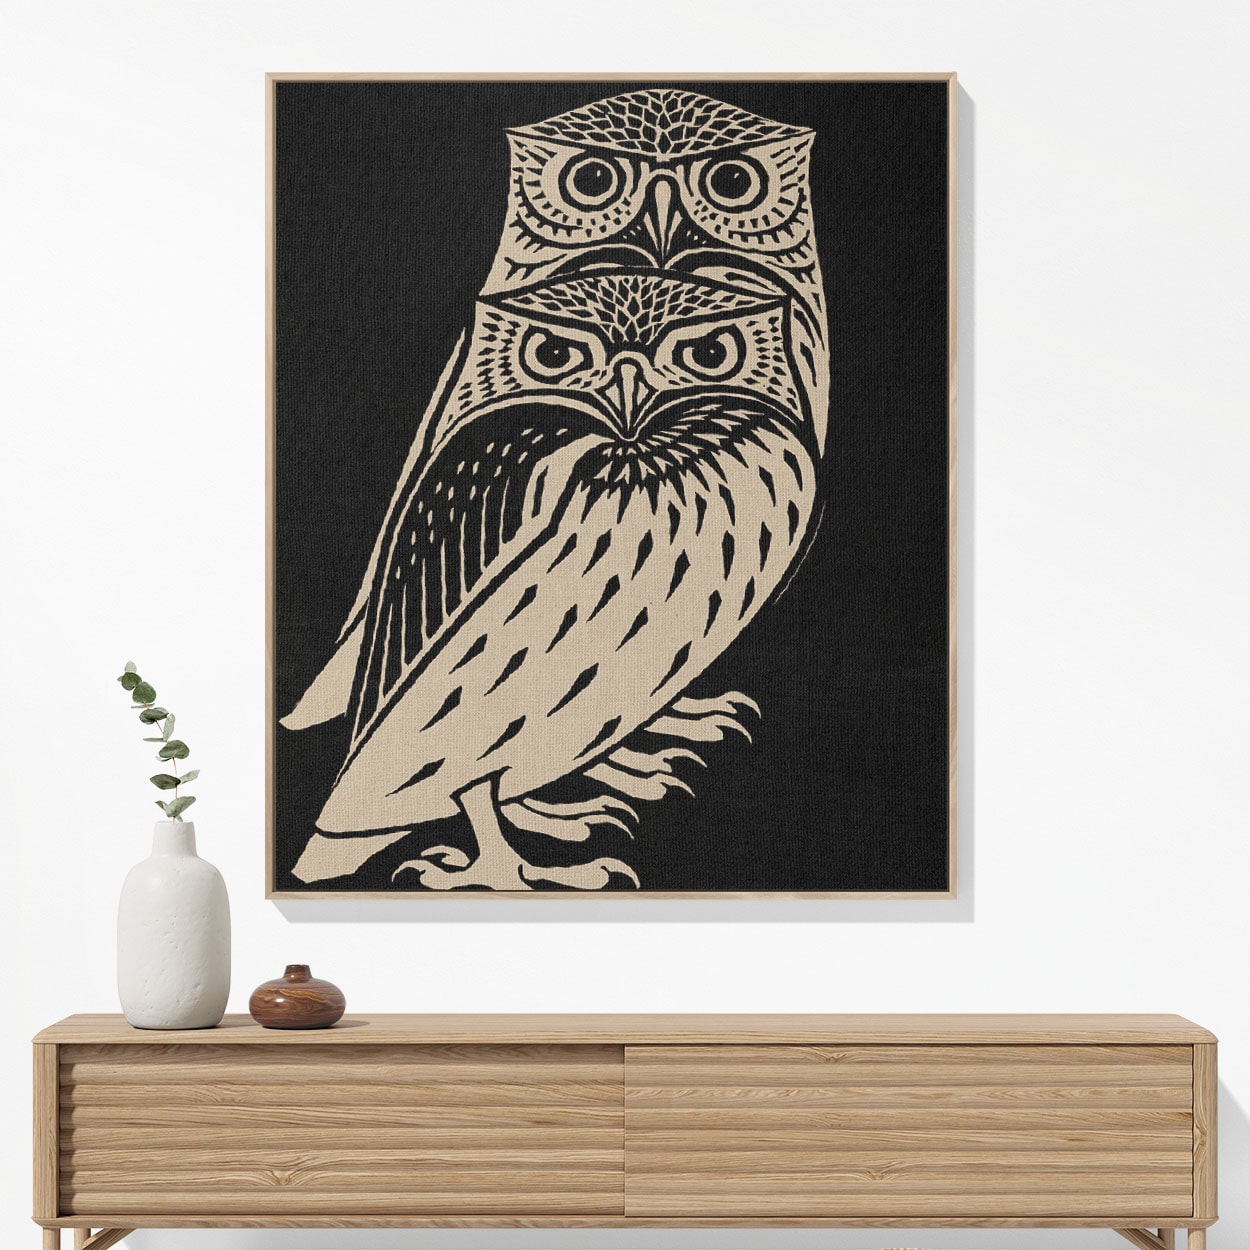 Unique Owl Woven Blanket Woven Blanket Hanging on a Wall as Framed Wall Art